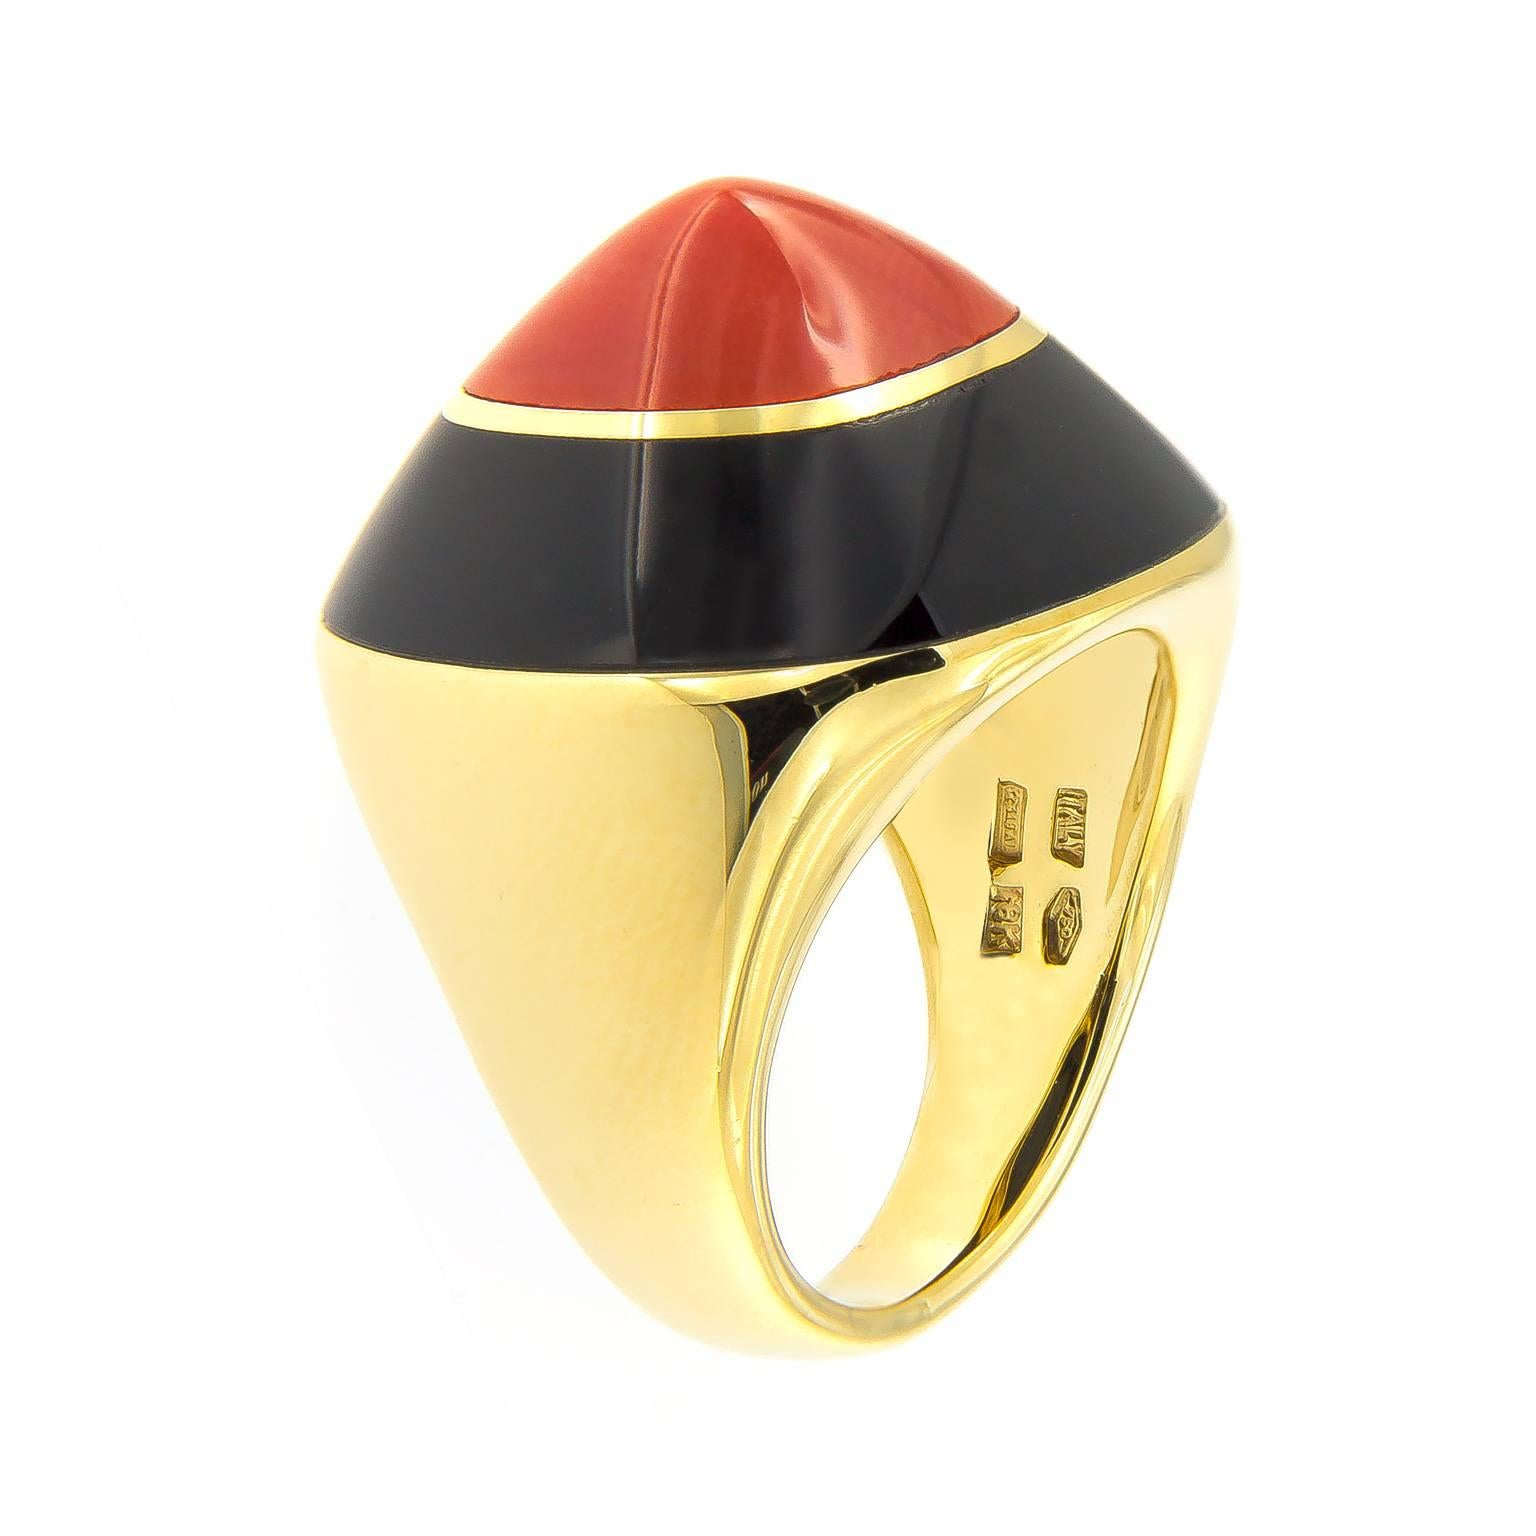 Cabochon Coral & Onyx Sugarloaf 18 Karat Yellow Gold Dome Ring For Sale